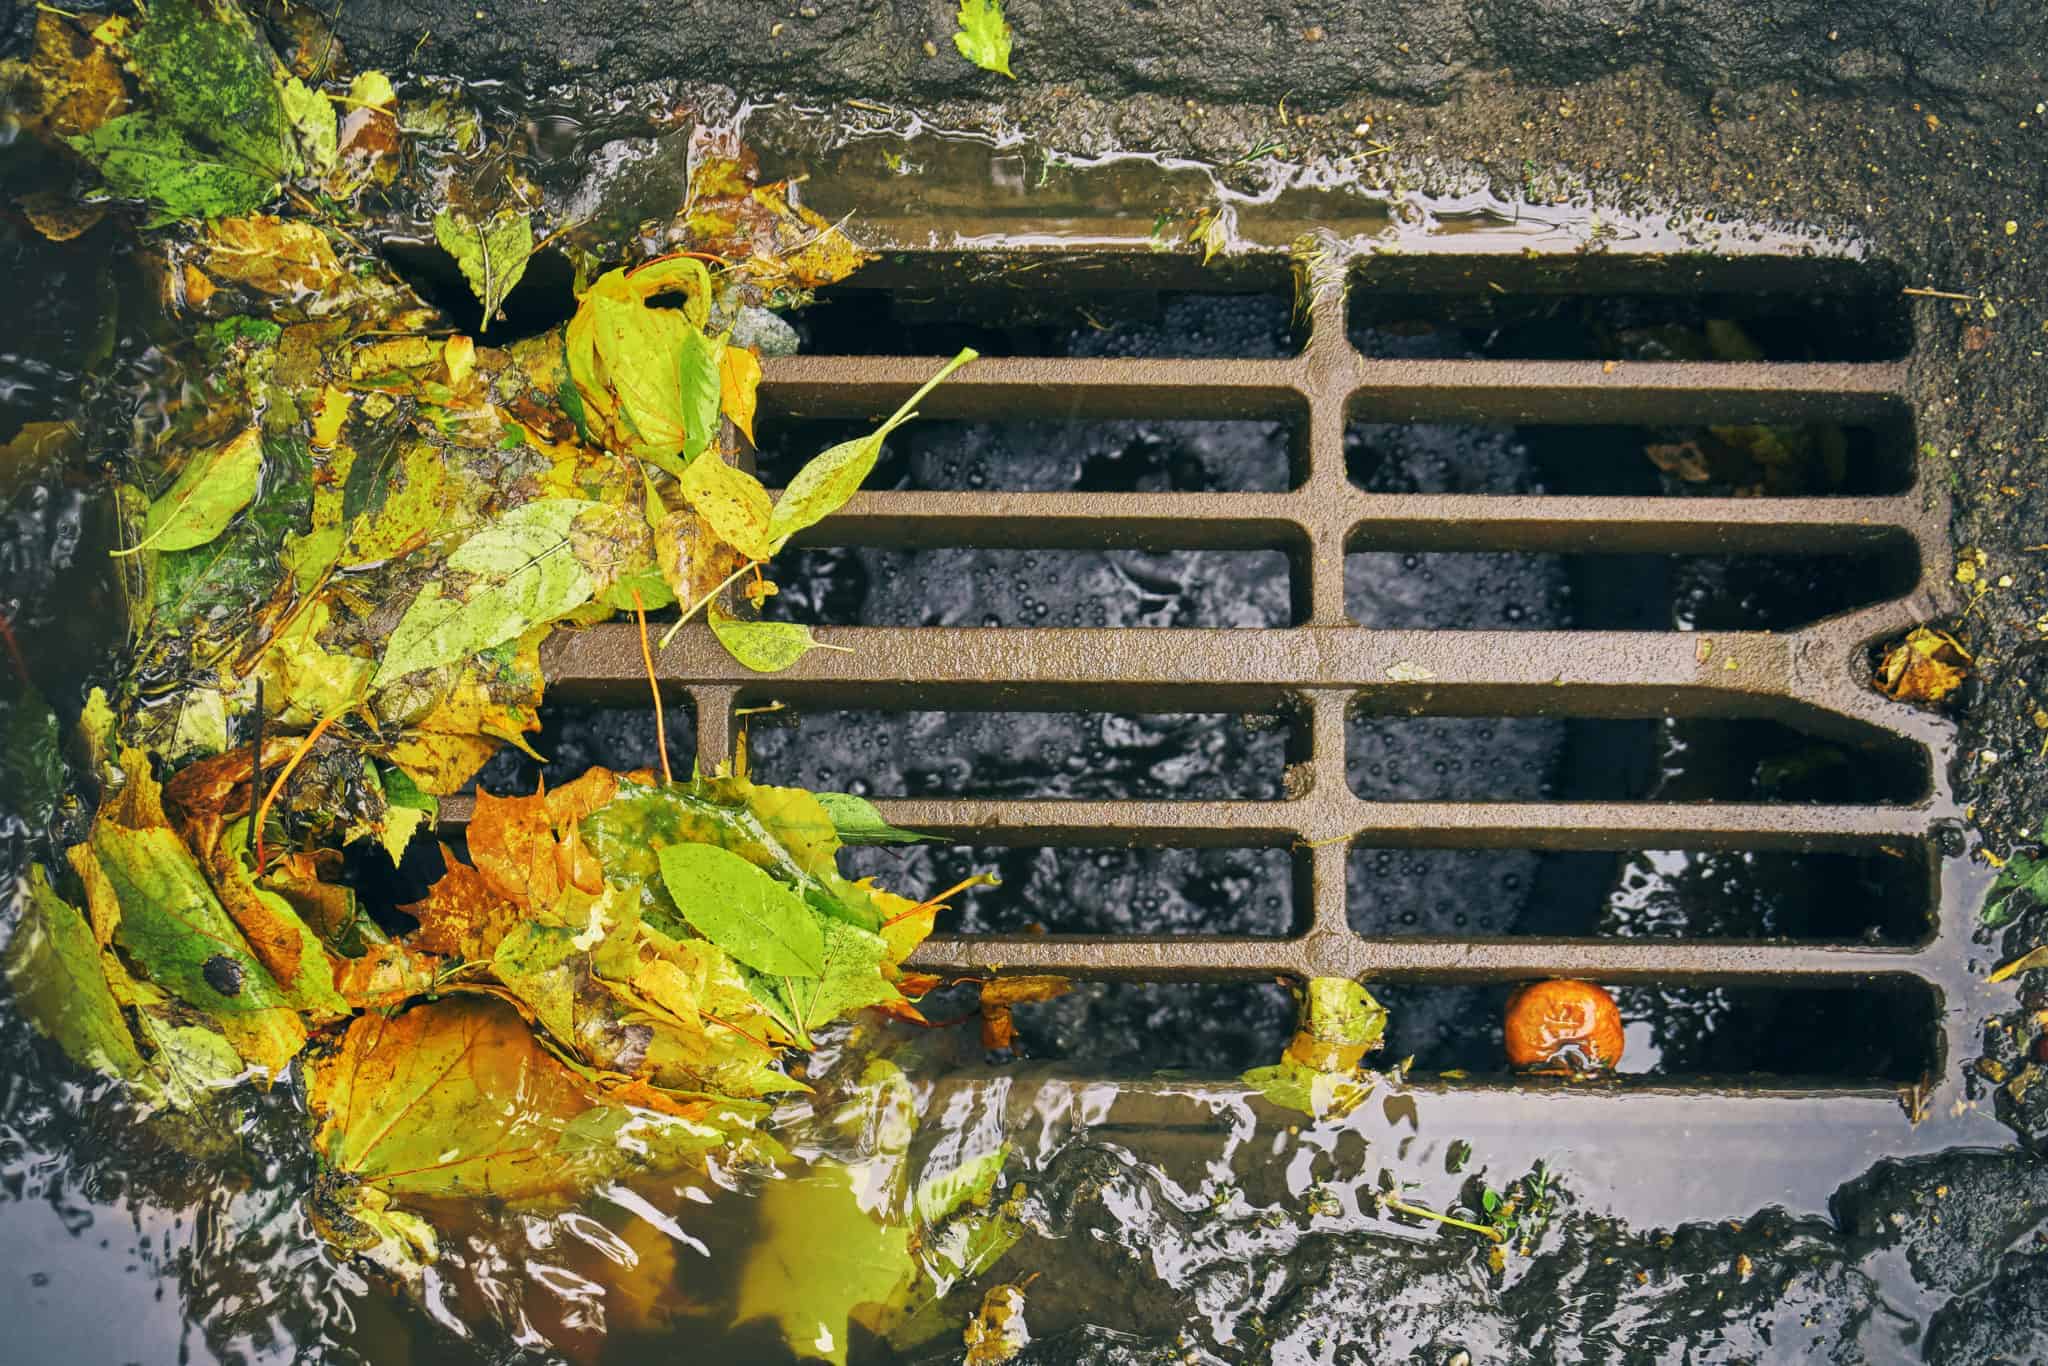 3 Common Winter Plumbing and Sewer Problems in Northern California